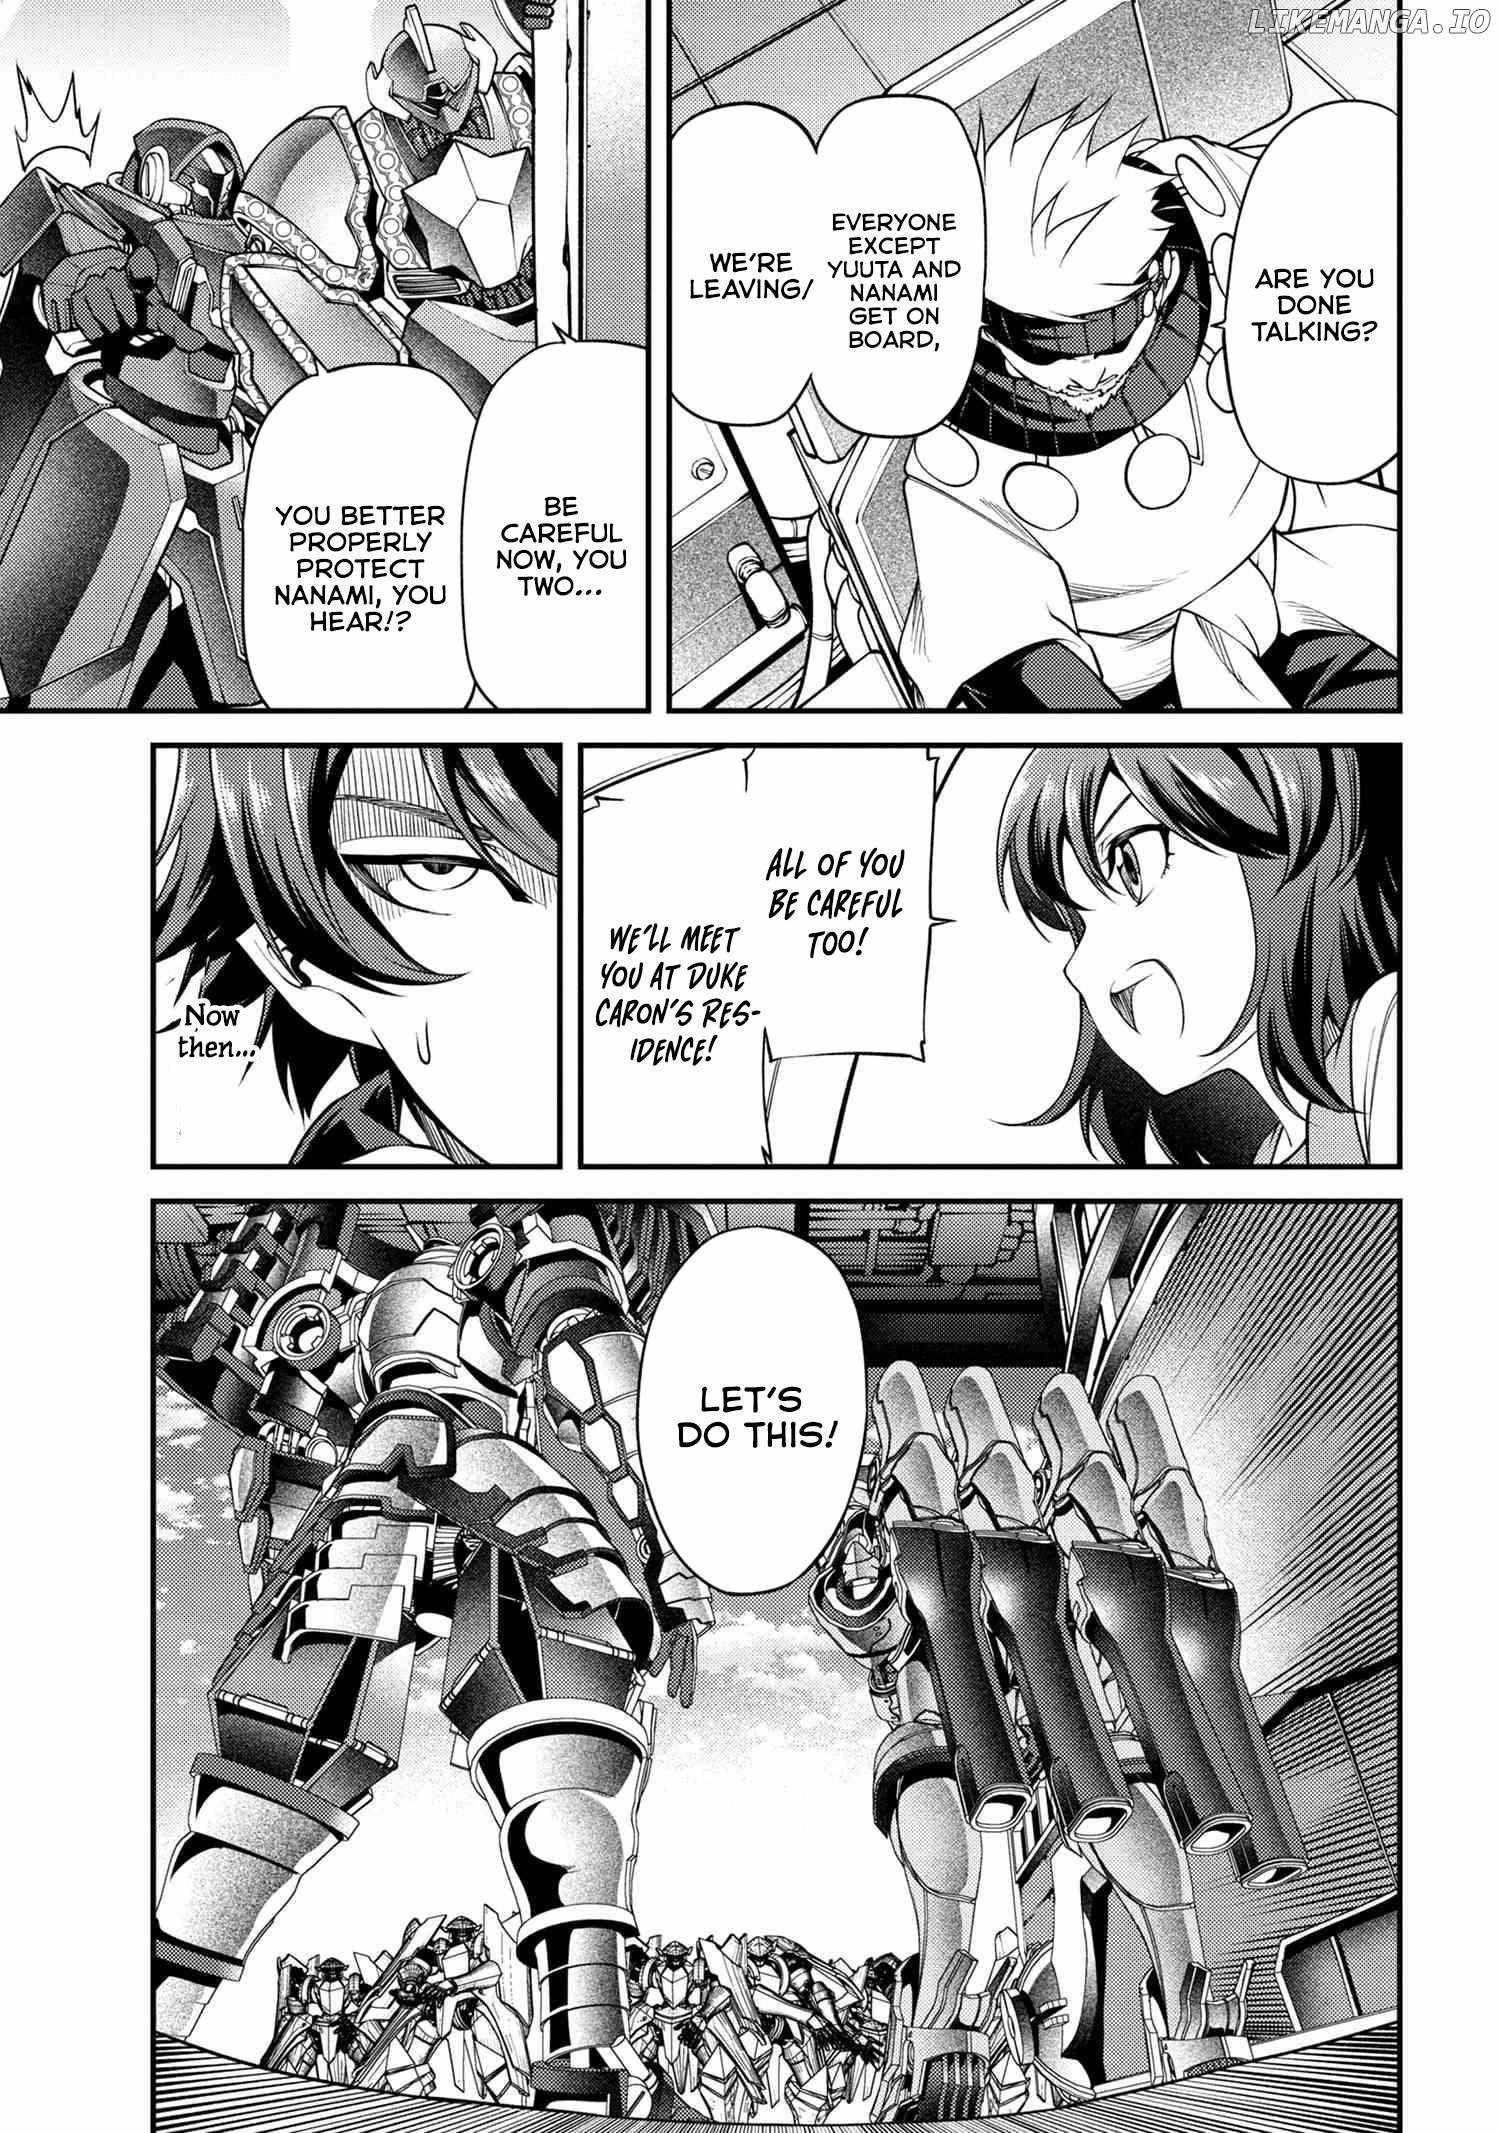 read I WAS SOLD AT THE LOWEST PRICE IN MY CLASS, HOWEVER MY PERSONAL PARAMETER IS THE MOST POWERFUL Chapter 20-2 Manga Online Free at Mangabuddy, MangaNato,Manhwatop | MangaSo.com